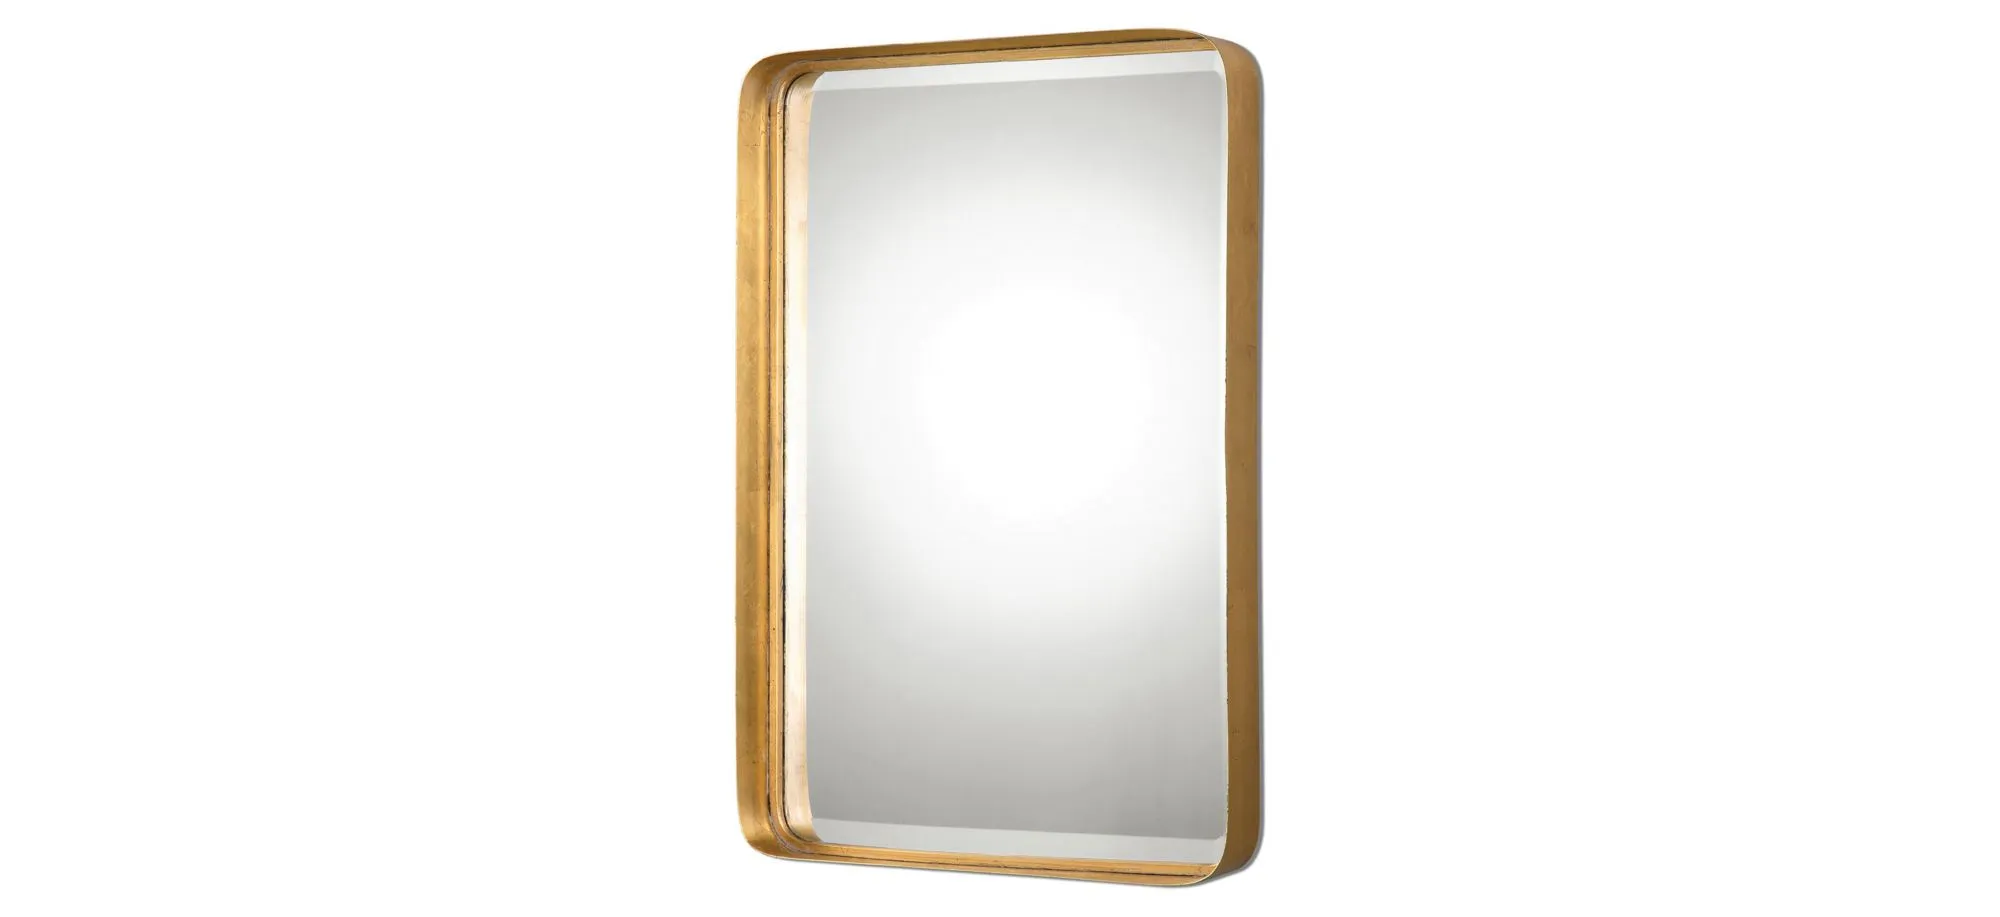 Crofton Wall Mirror in Antiqued Gold Leaf by Uttermost